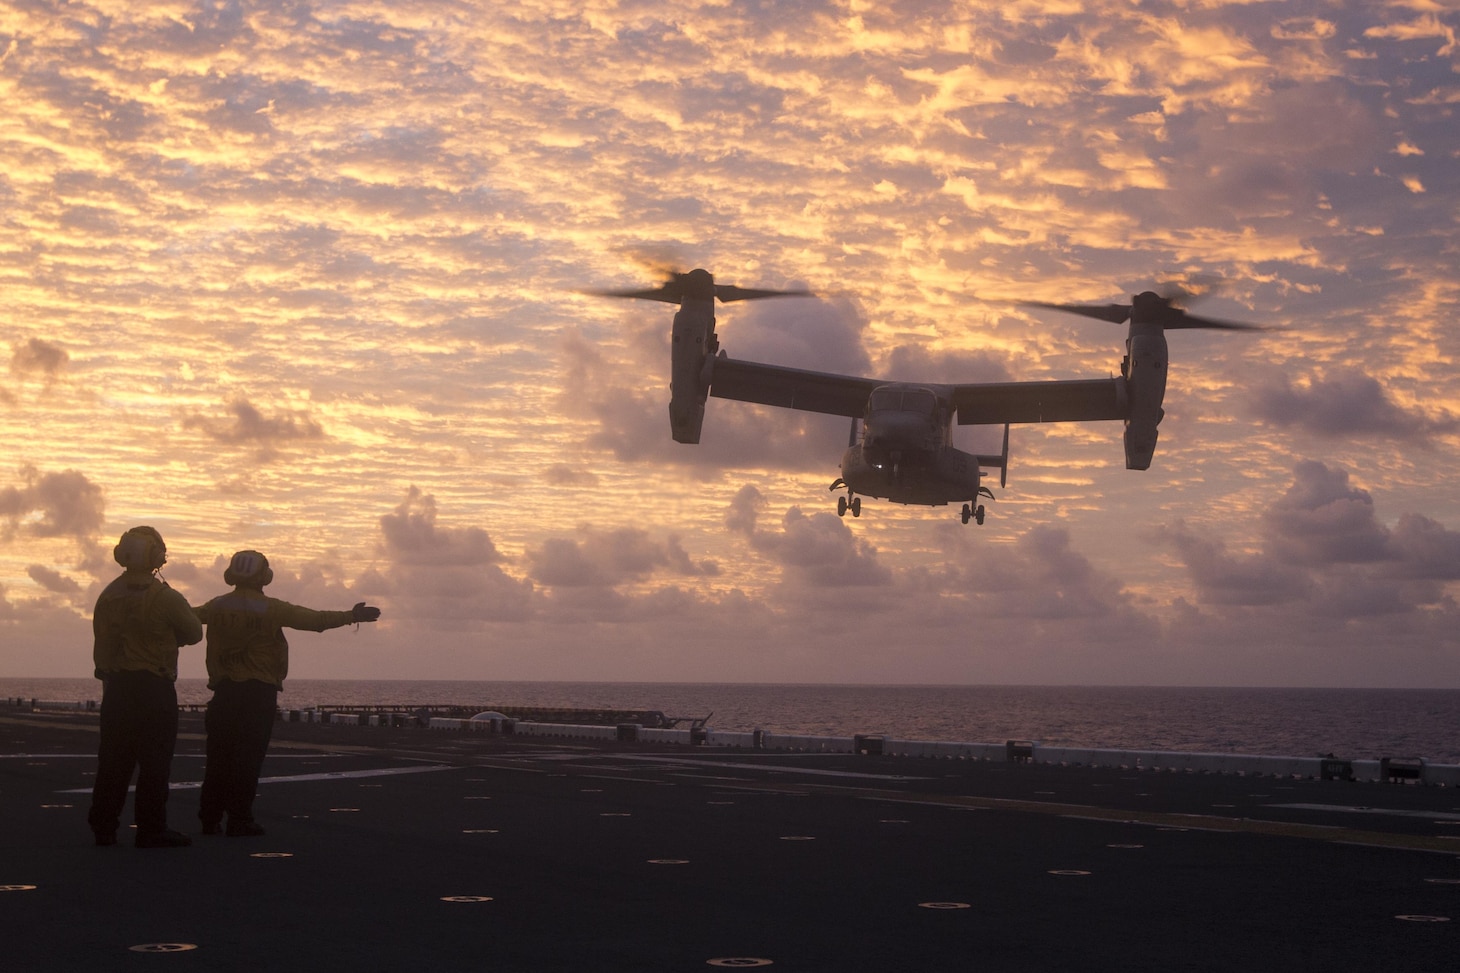 An MV-22B Osprey tiltrotor aircraft prepares to land aboard the USS Bonhomme Richard (LHD 6) during Exercise Talisman Saber 17 while underway in the Pacific Ocean, June 10, 2017. The MV-22 belongs to Marine Medium Tiltrotor Squadron 265 (Reinforced), part of the Aviation Combat Element of the 31st Marine Expeditionary Unit. Talisman Saber is a biennial exercise designed to improve the interoperability between Australian and U.S. forces. The 31st MEU is taking part in Talisman Saber while deployed on a regularly-scheduled patrol of the Indo-Asia-Pacific region. (U.S. Marine Corps photo by Lance Cpl. Amy Phan/Released)